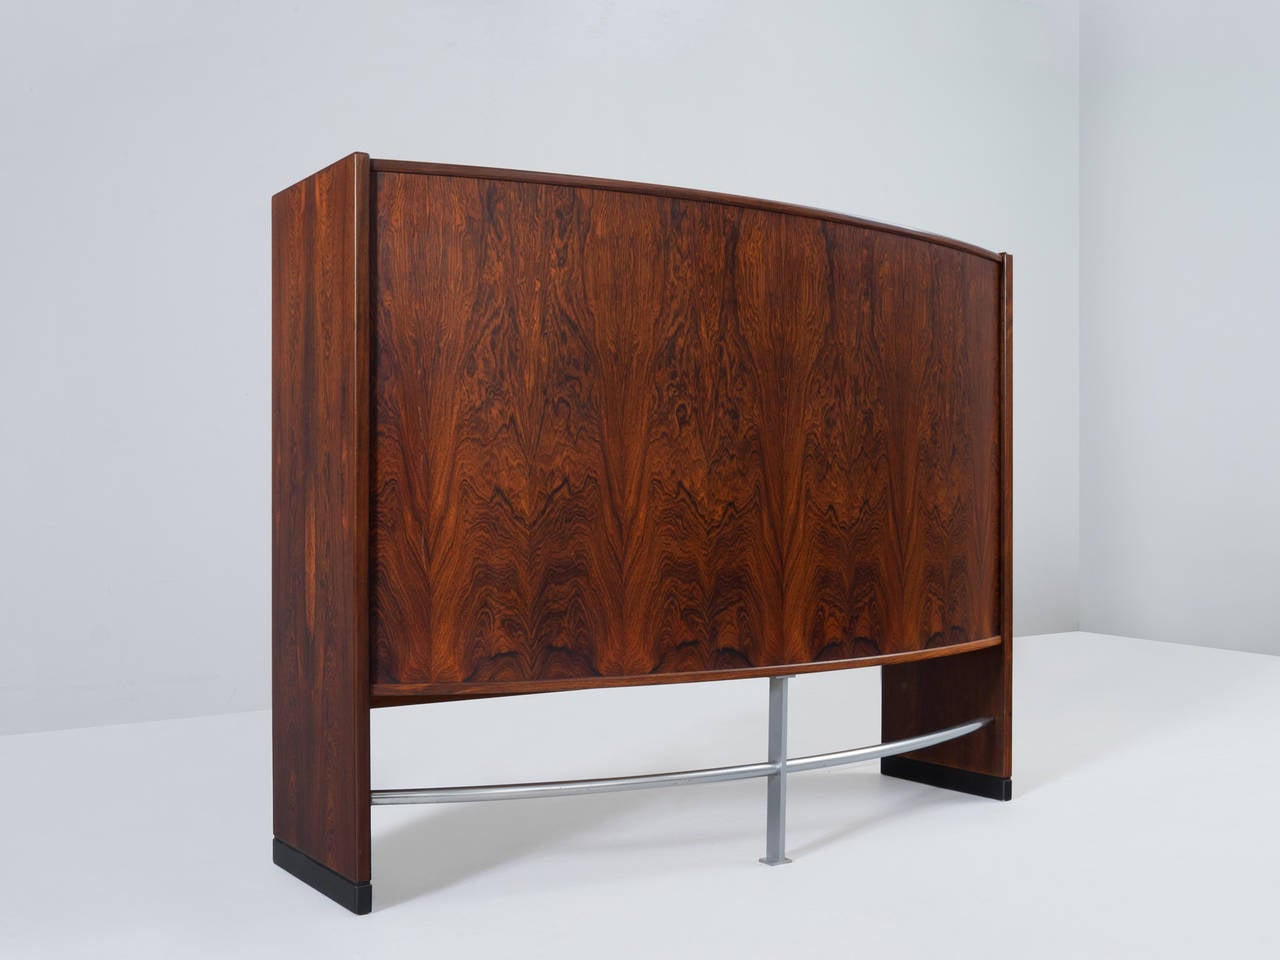 Luxury Danish Dry Bar In Rosewood - Chrome And Laminated Details 1